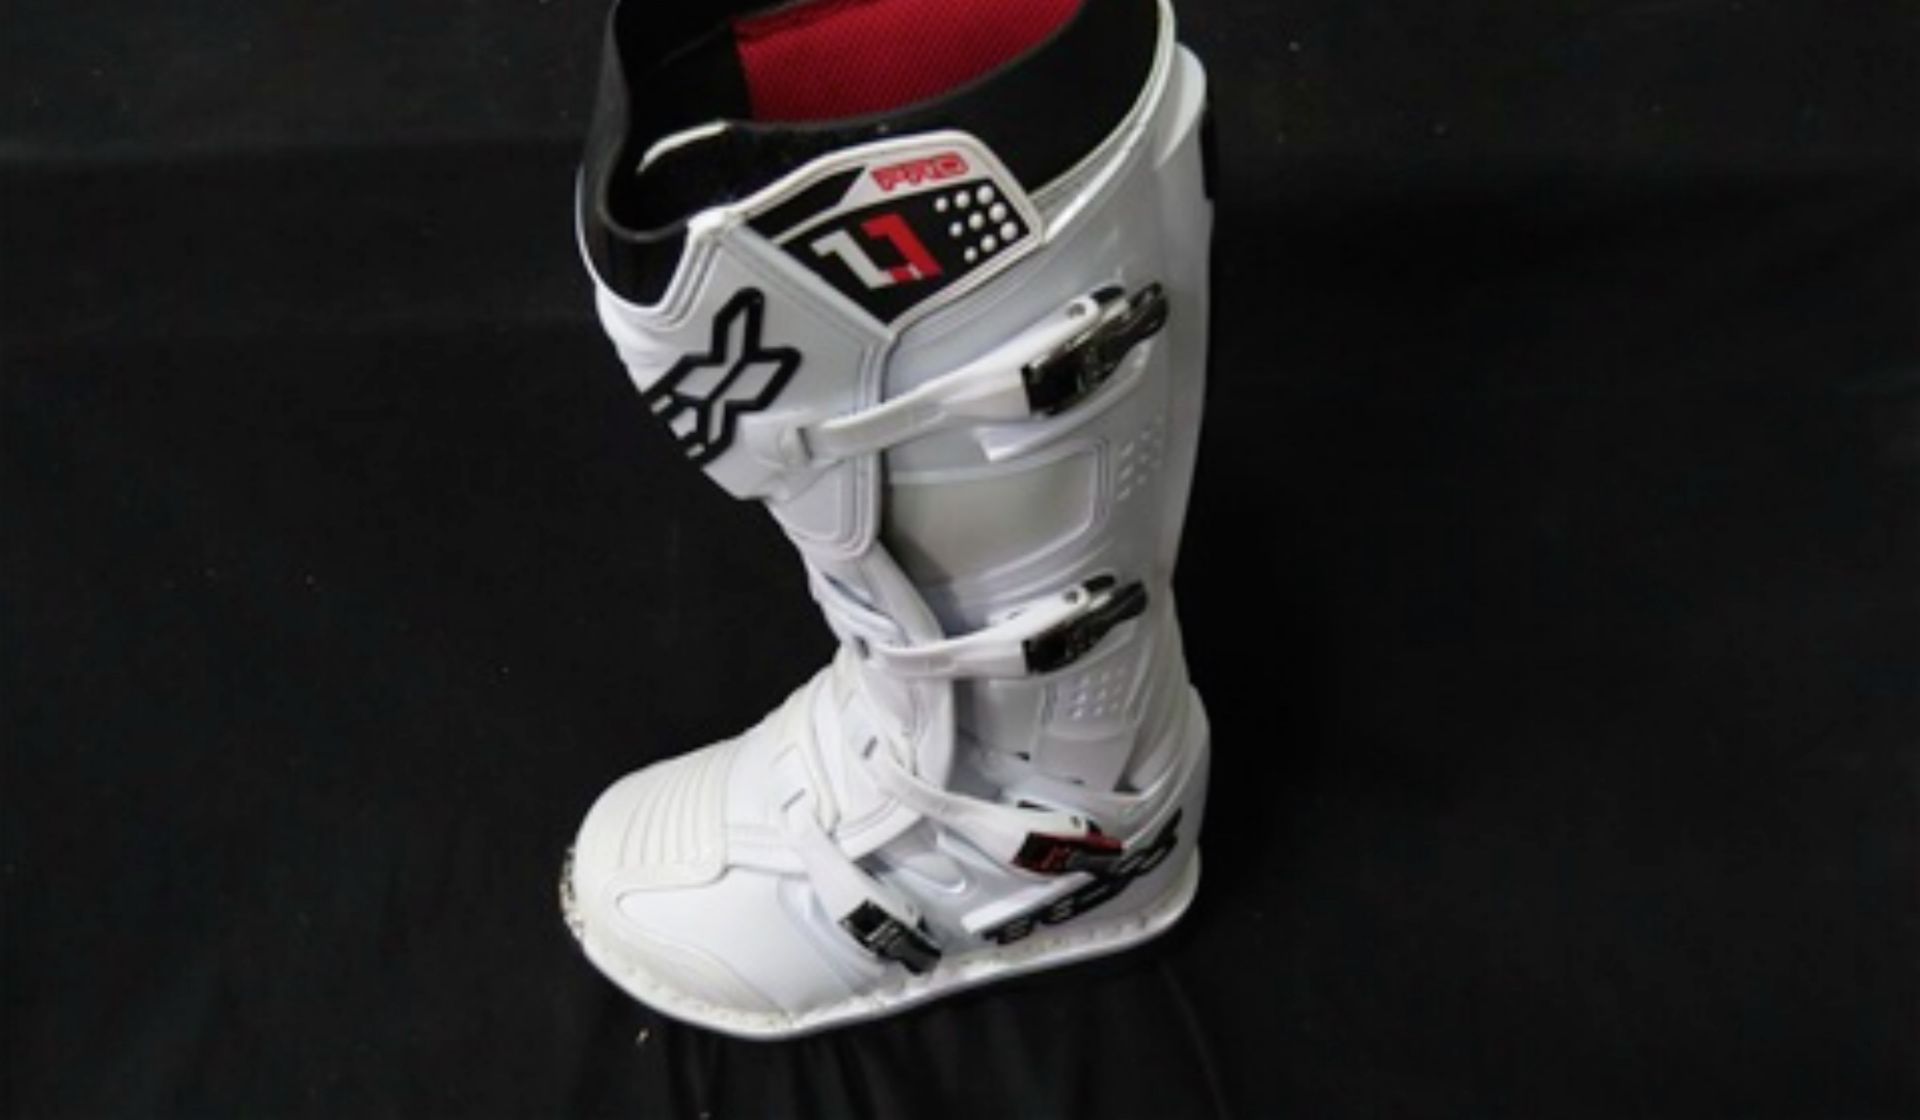 TCX Pro 1.1 Evo Motocross Boots
UPPER: High wear resistant micro fibre, padded front and ankle area